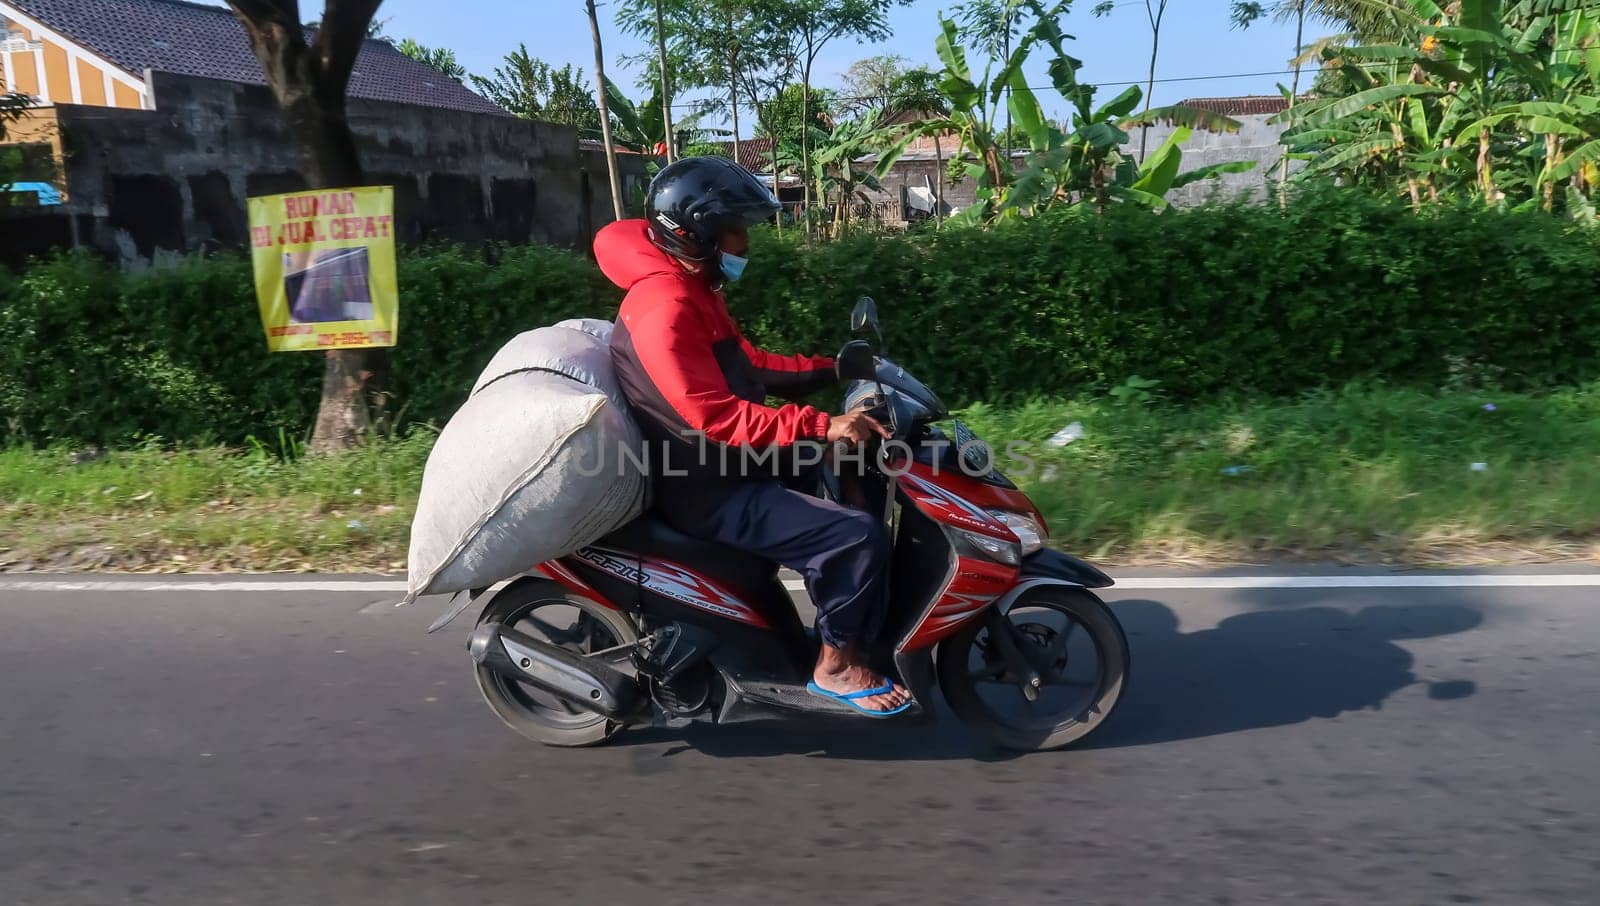 motorbike riding in asia as one of goods transportation method, being used to transport many kind of goods intercity by antoksena